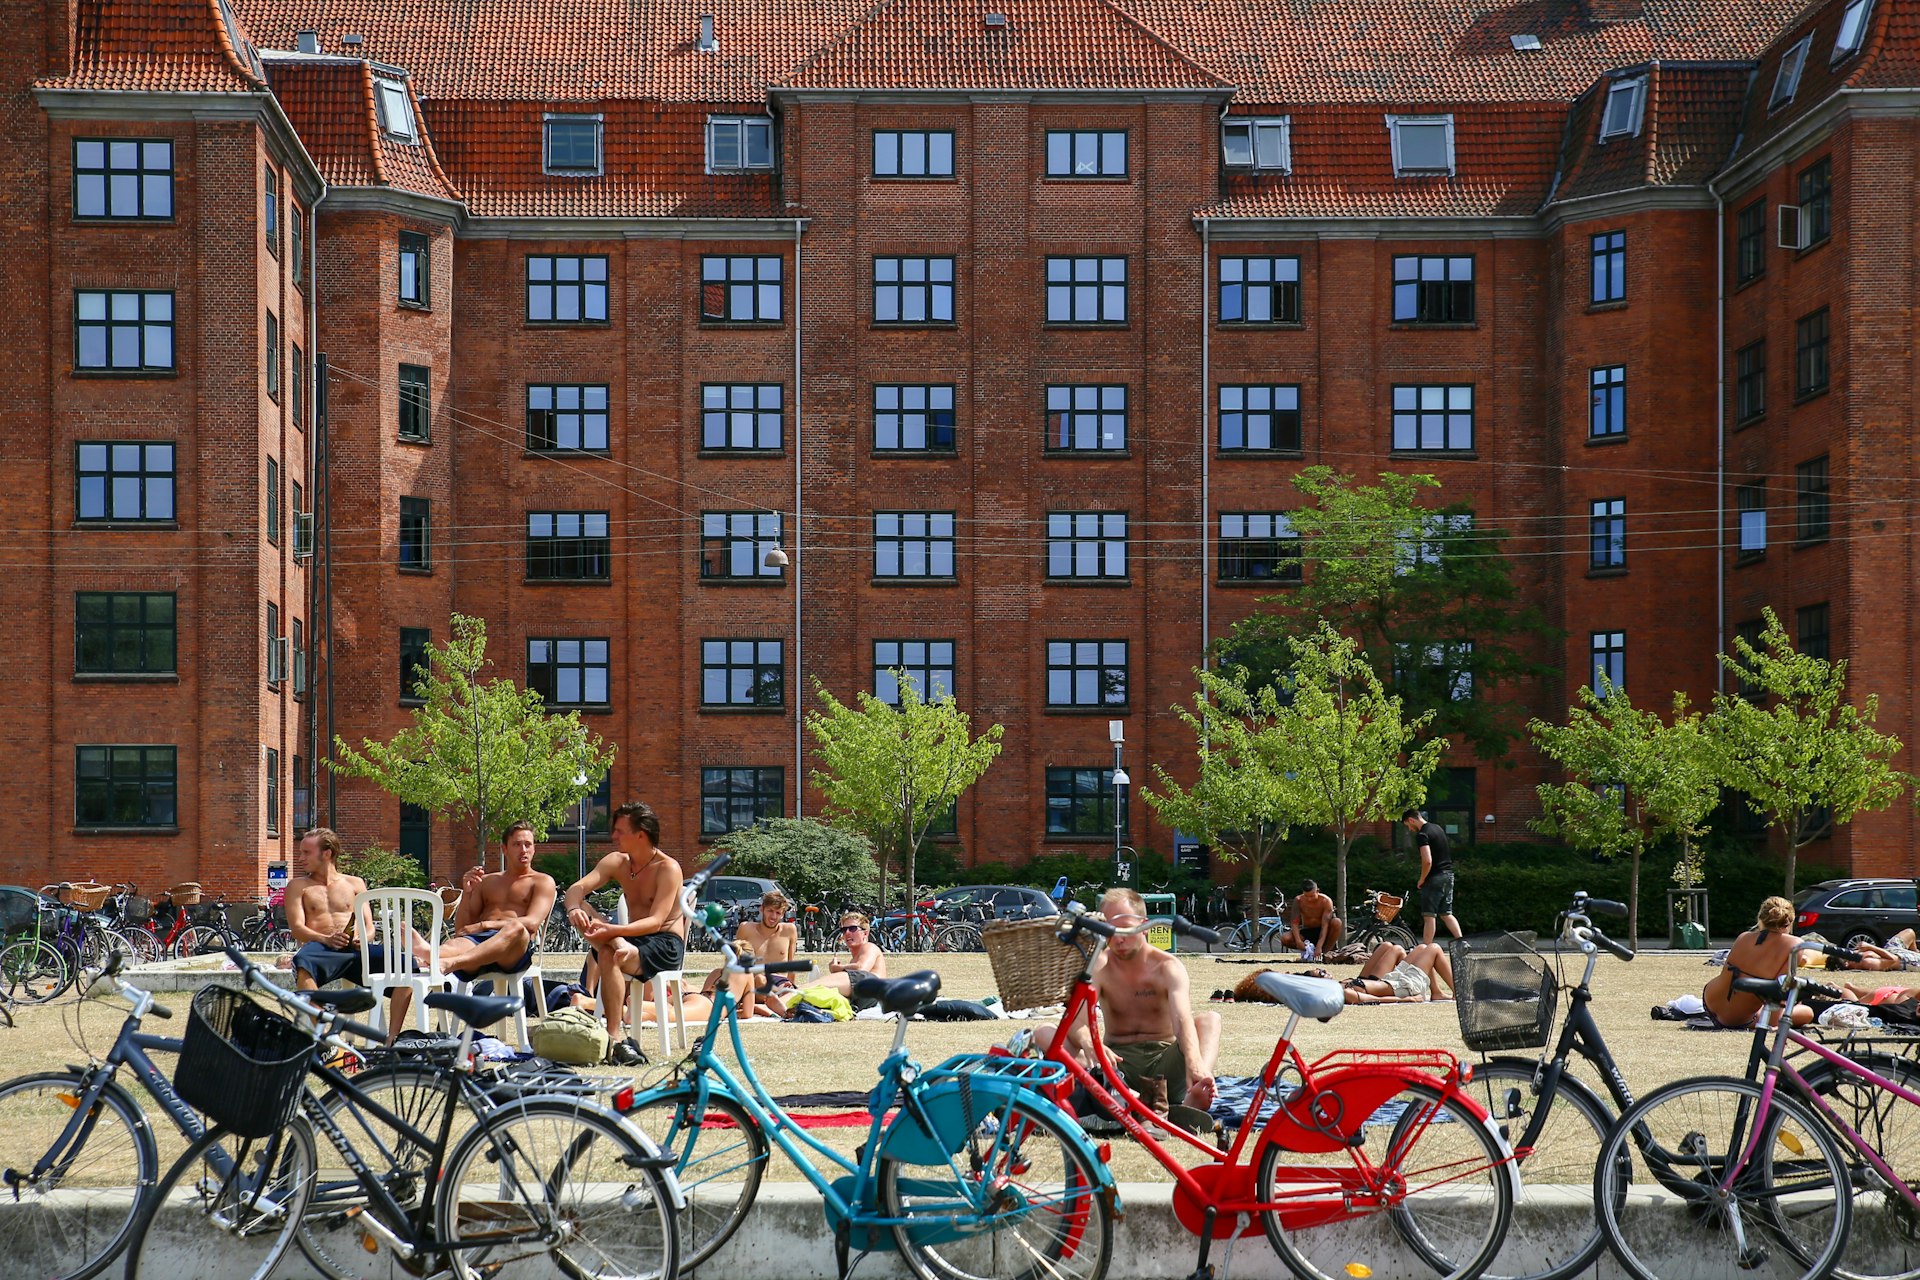 A row of parked bicycles obscures the view of the people sat on a beach sunbathing